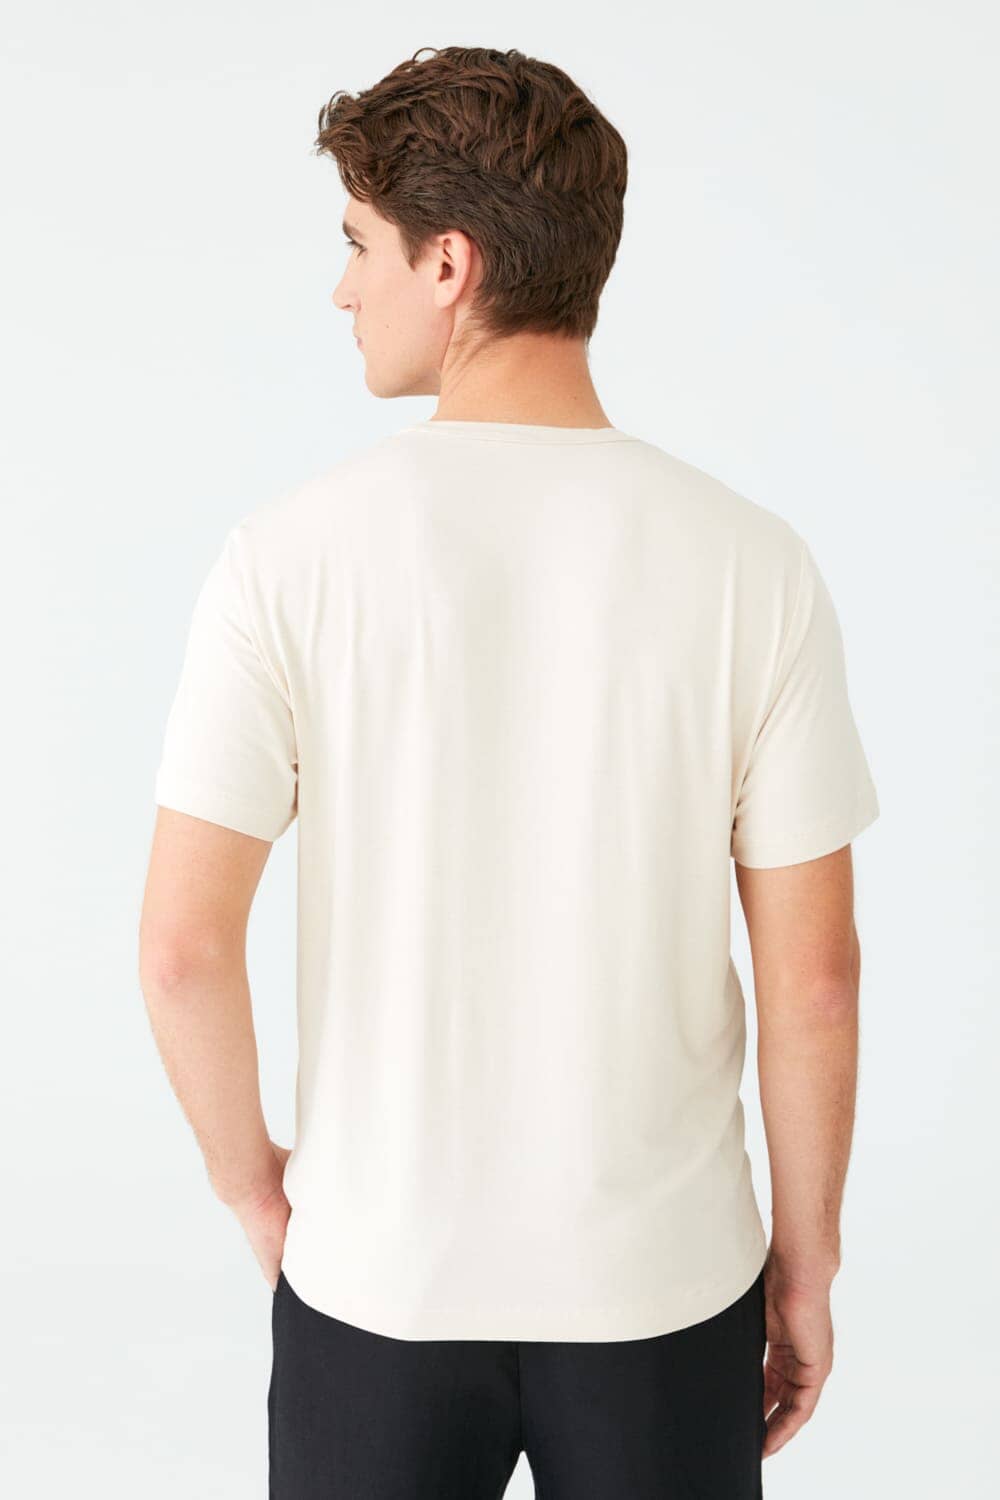 About Bamboo Lyocell, Sustainable T shirts